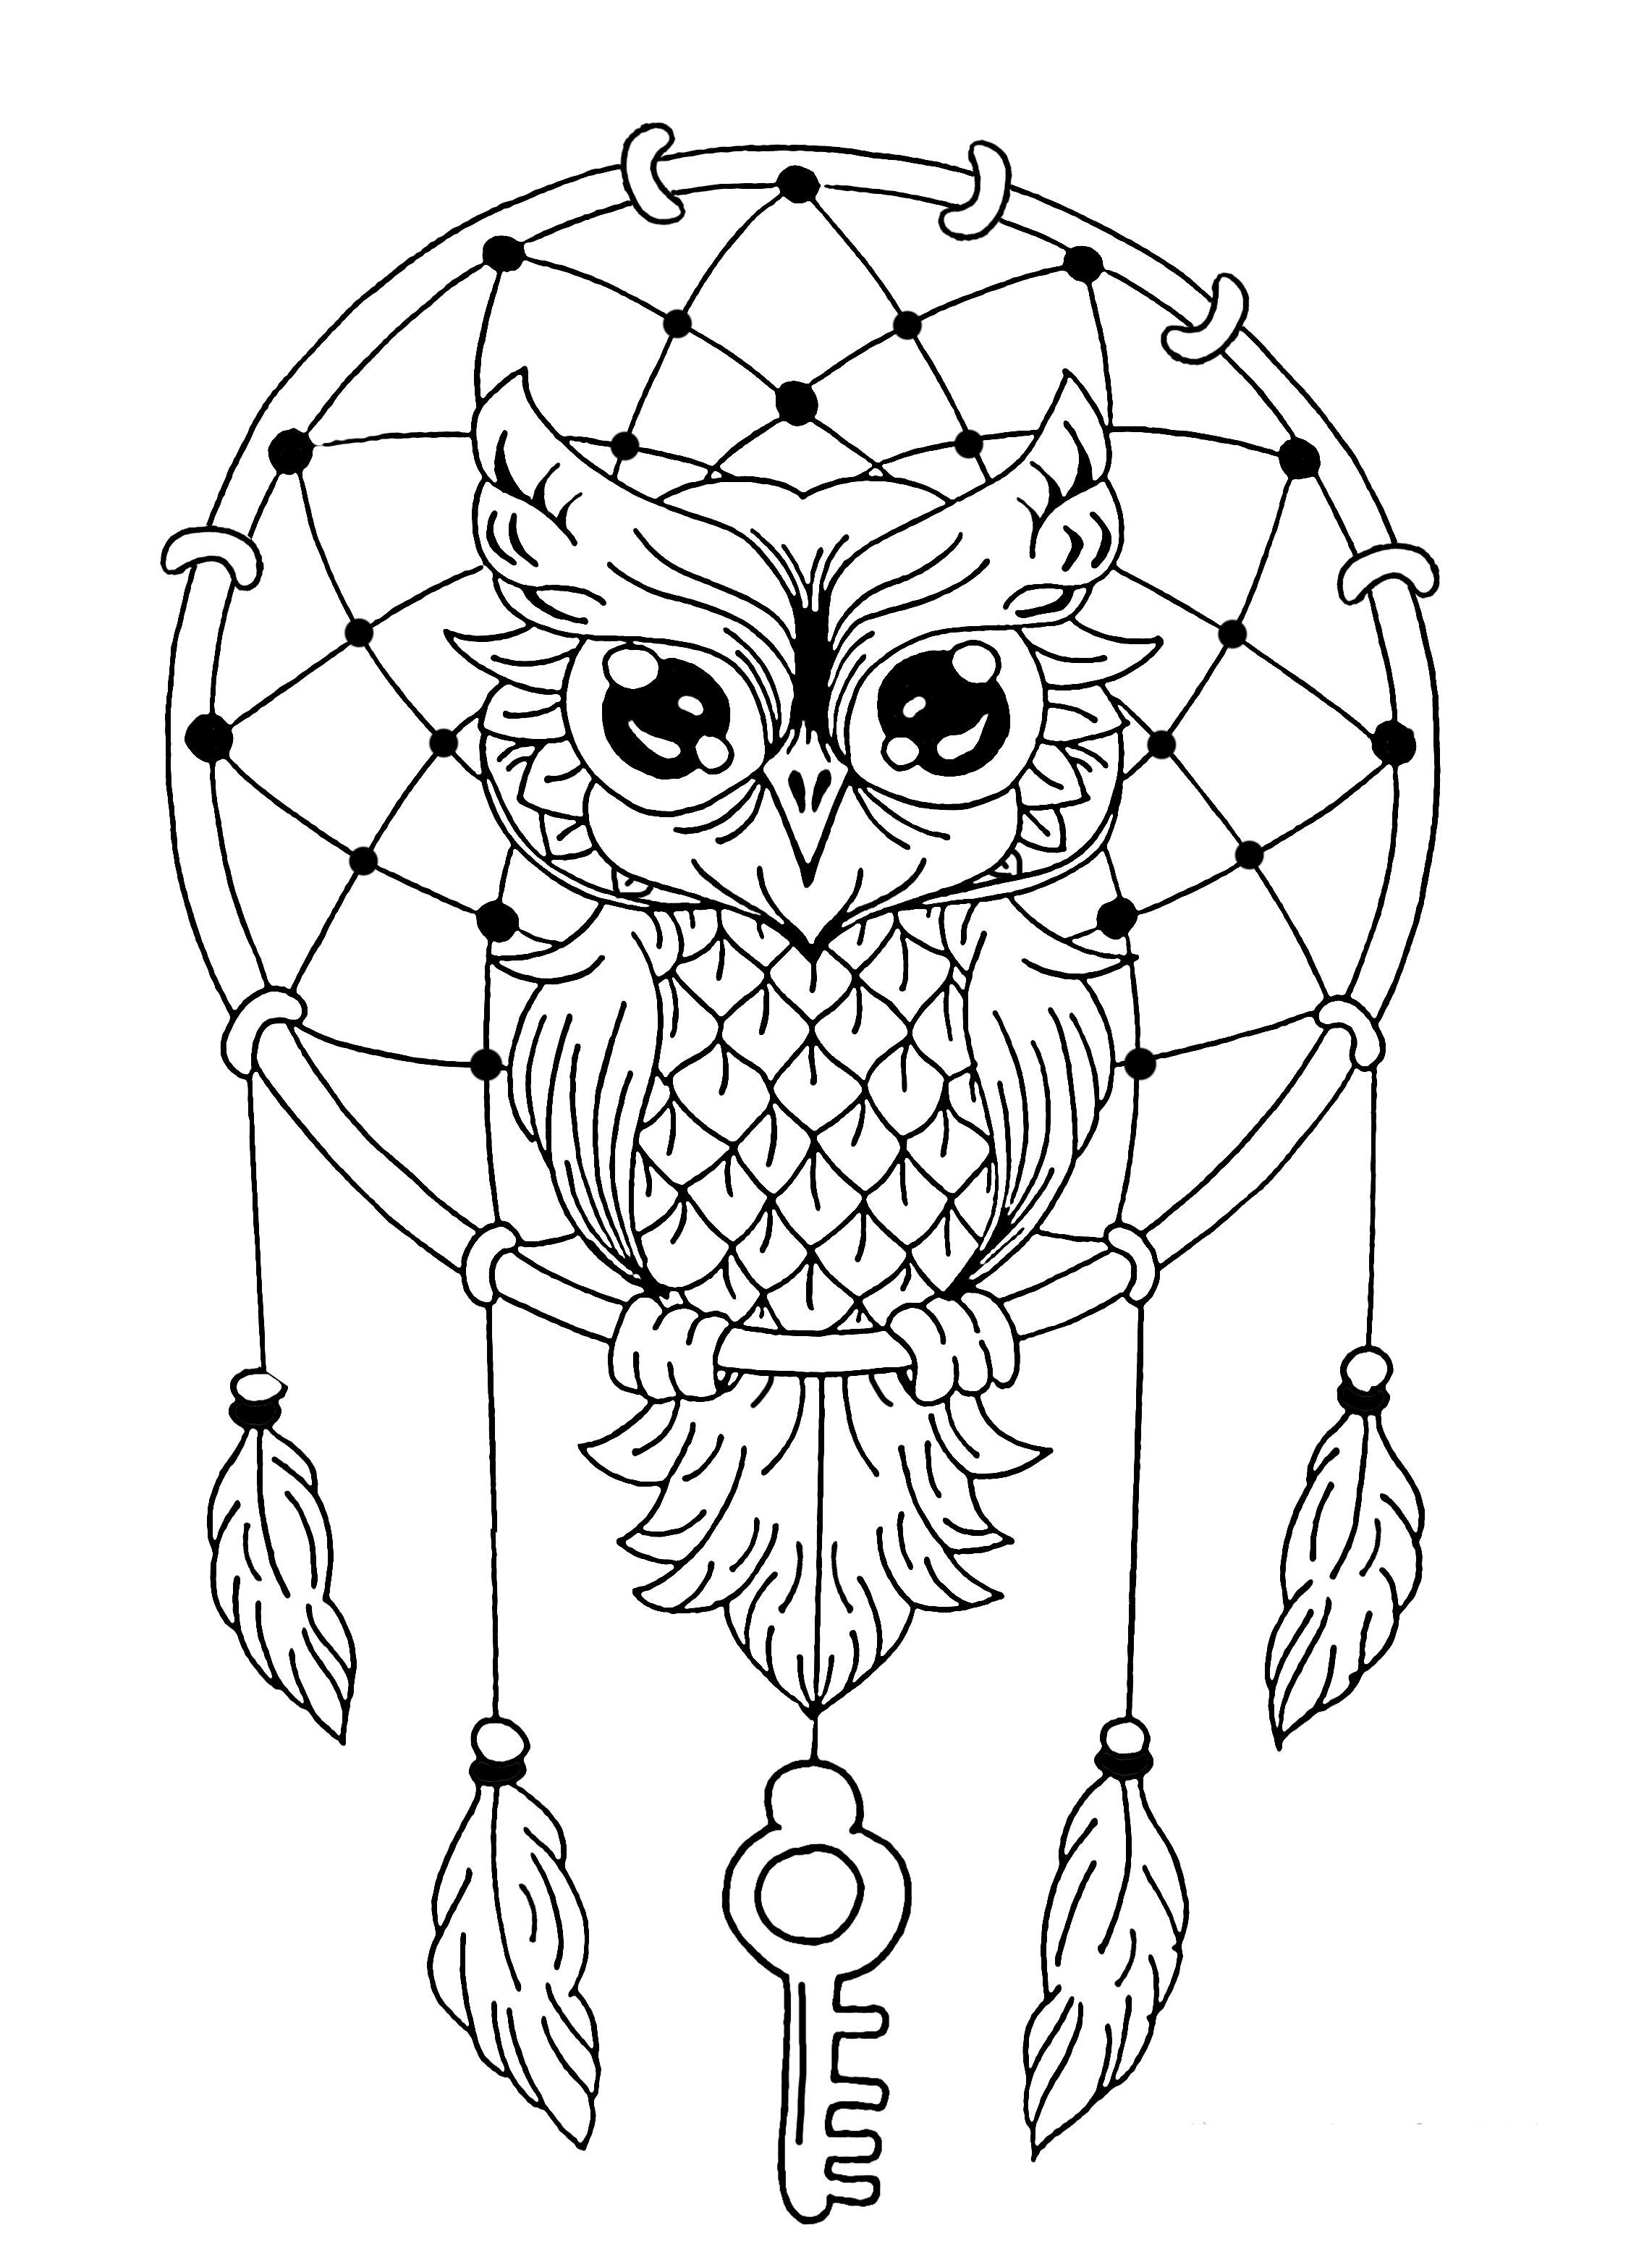 Mandala Coloring Pages Free Online Coloring Pages Owl Mandalag Pages For Kids Disney Pdf Free